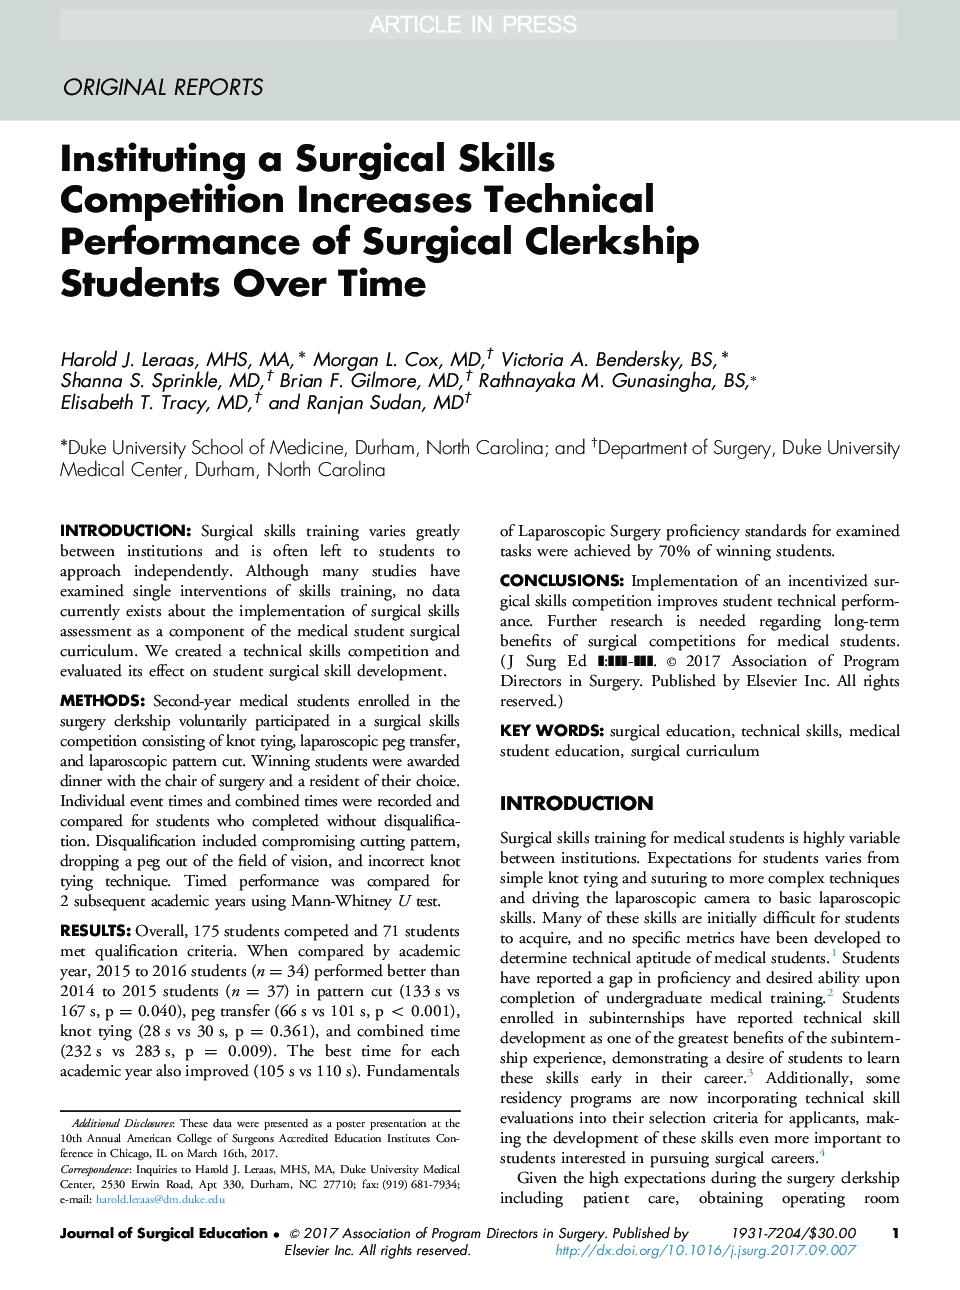 Instituting a Surgical Skills Competition Increases Technical Performance of Surgical Clerkship Students Over Time